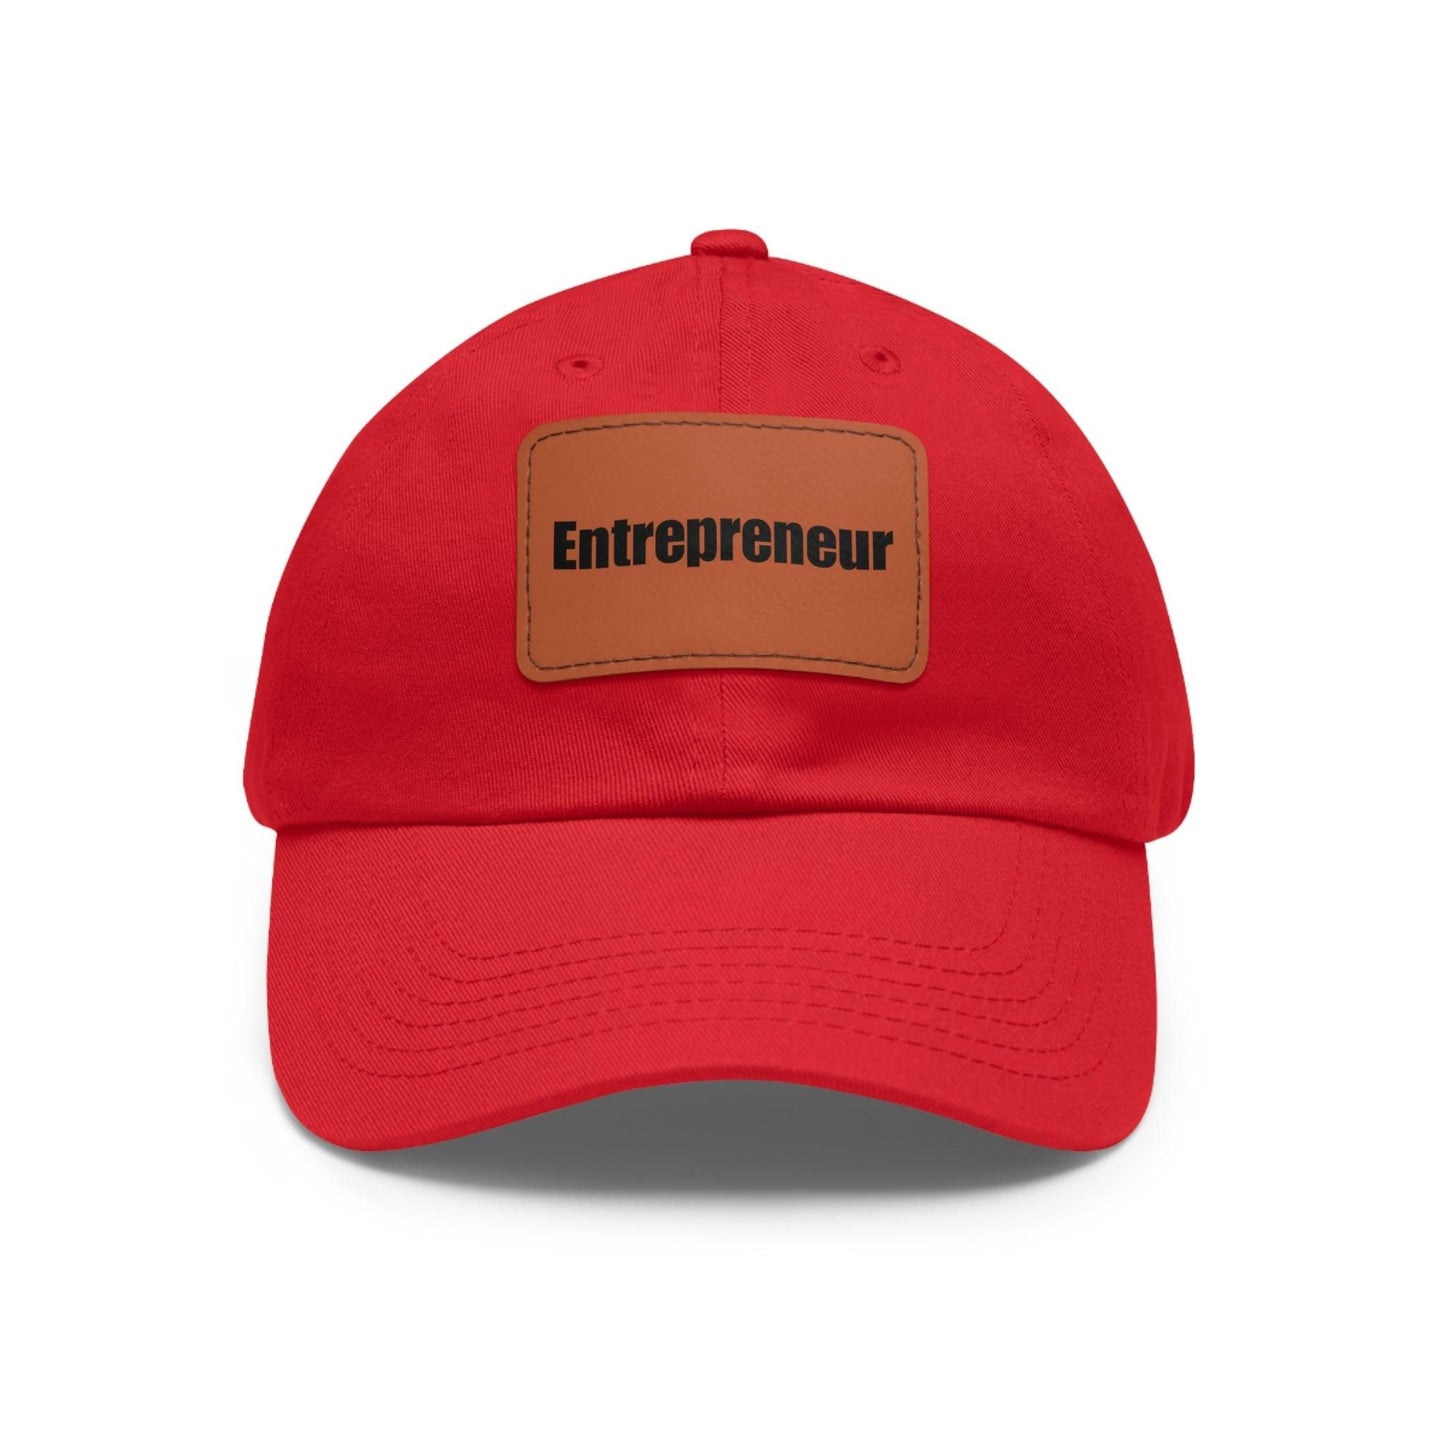 Entrepreneur Baseball Hat with Leather Patch Cap Red / Light Brown patch Rectangle One size